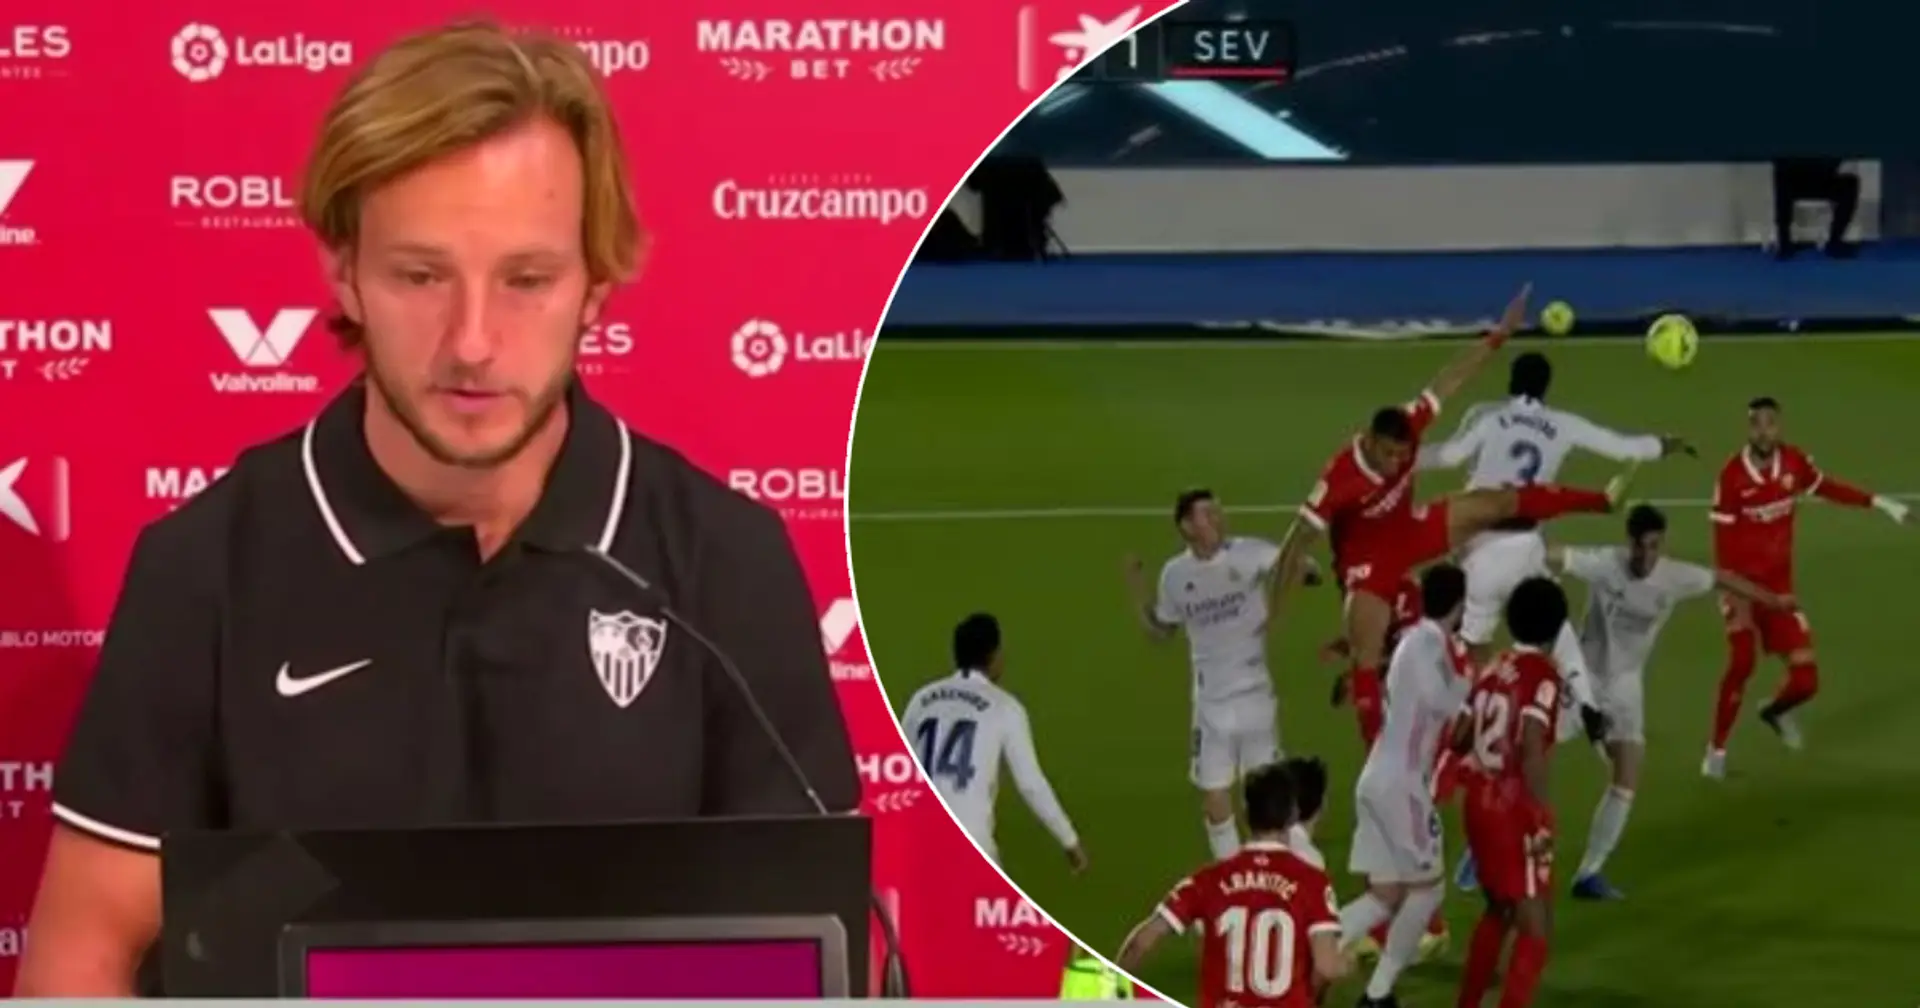 'It was a clear penalty': Rakitic insists VAR was correct in controversial draw with Sevilla